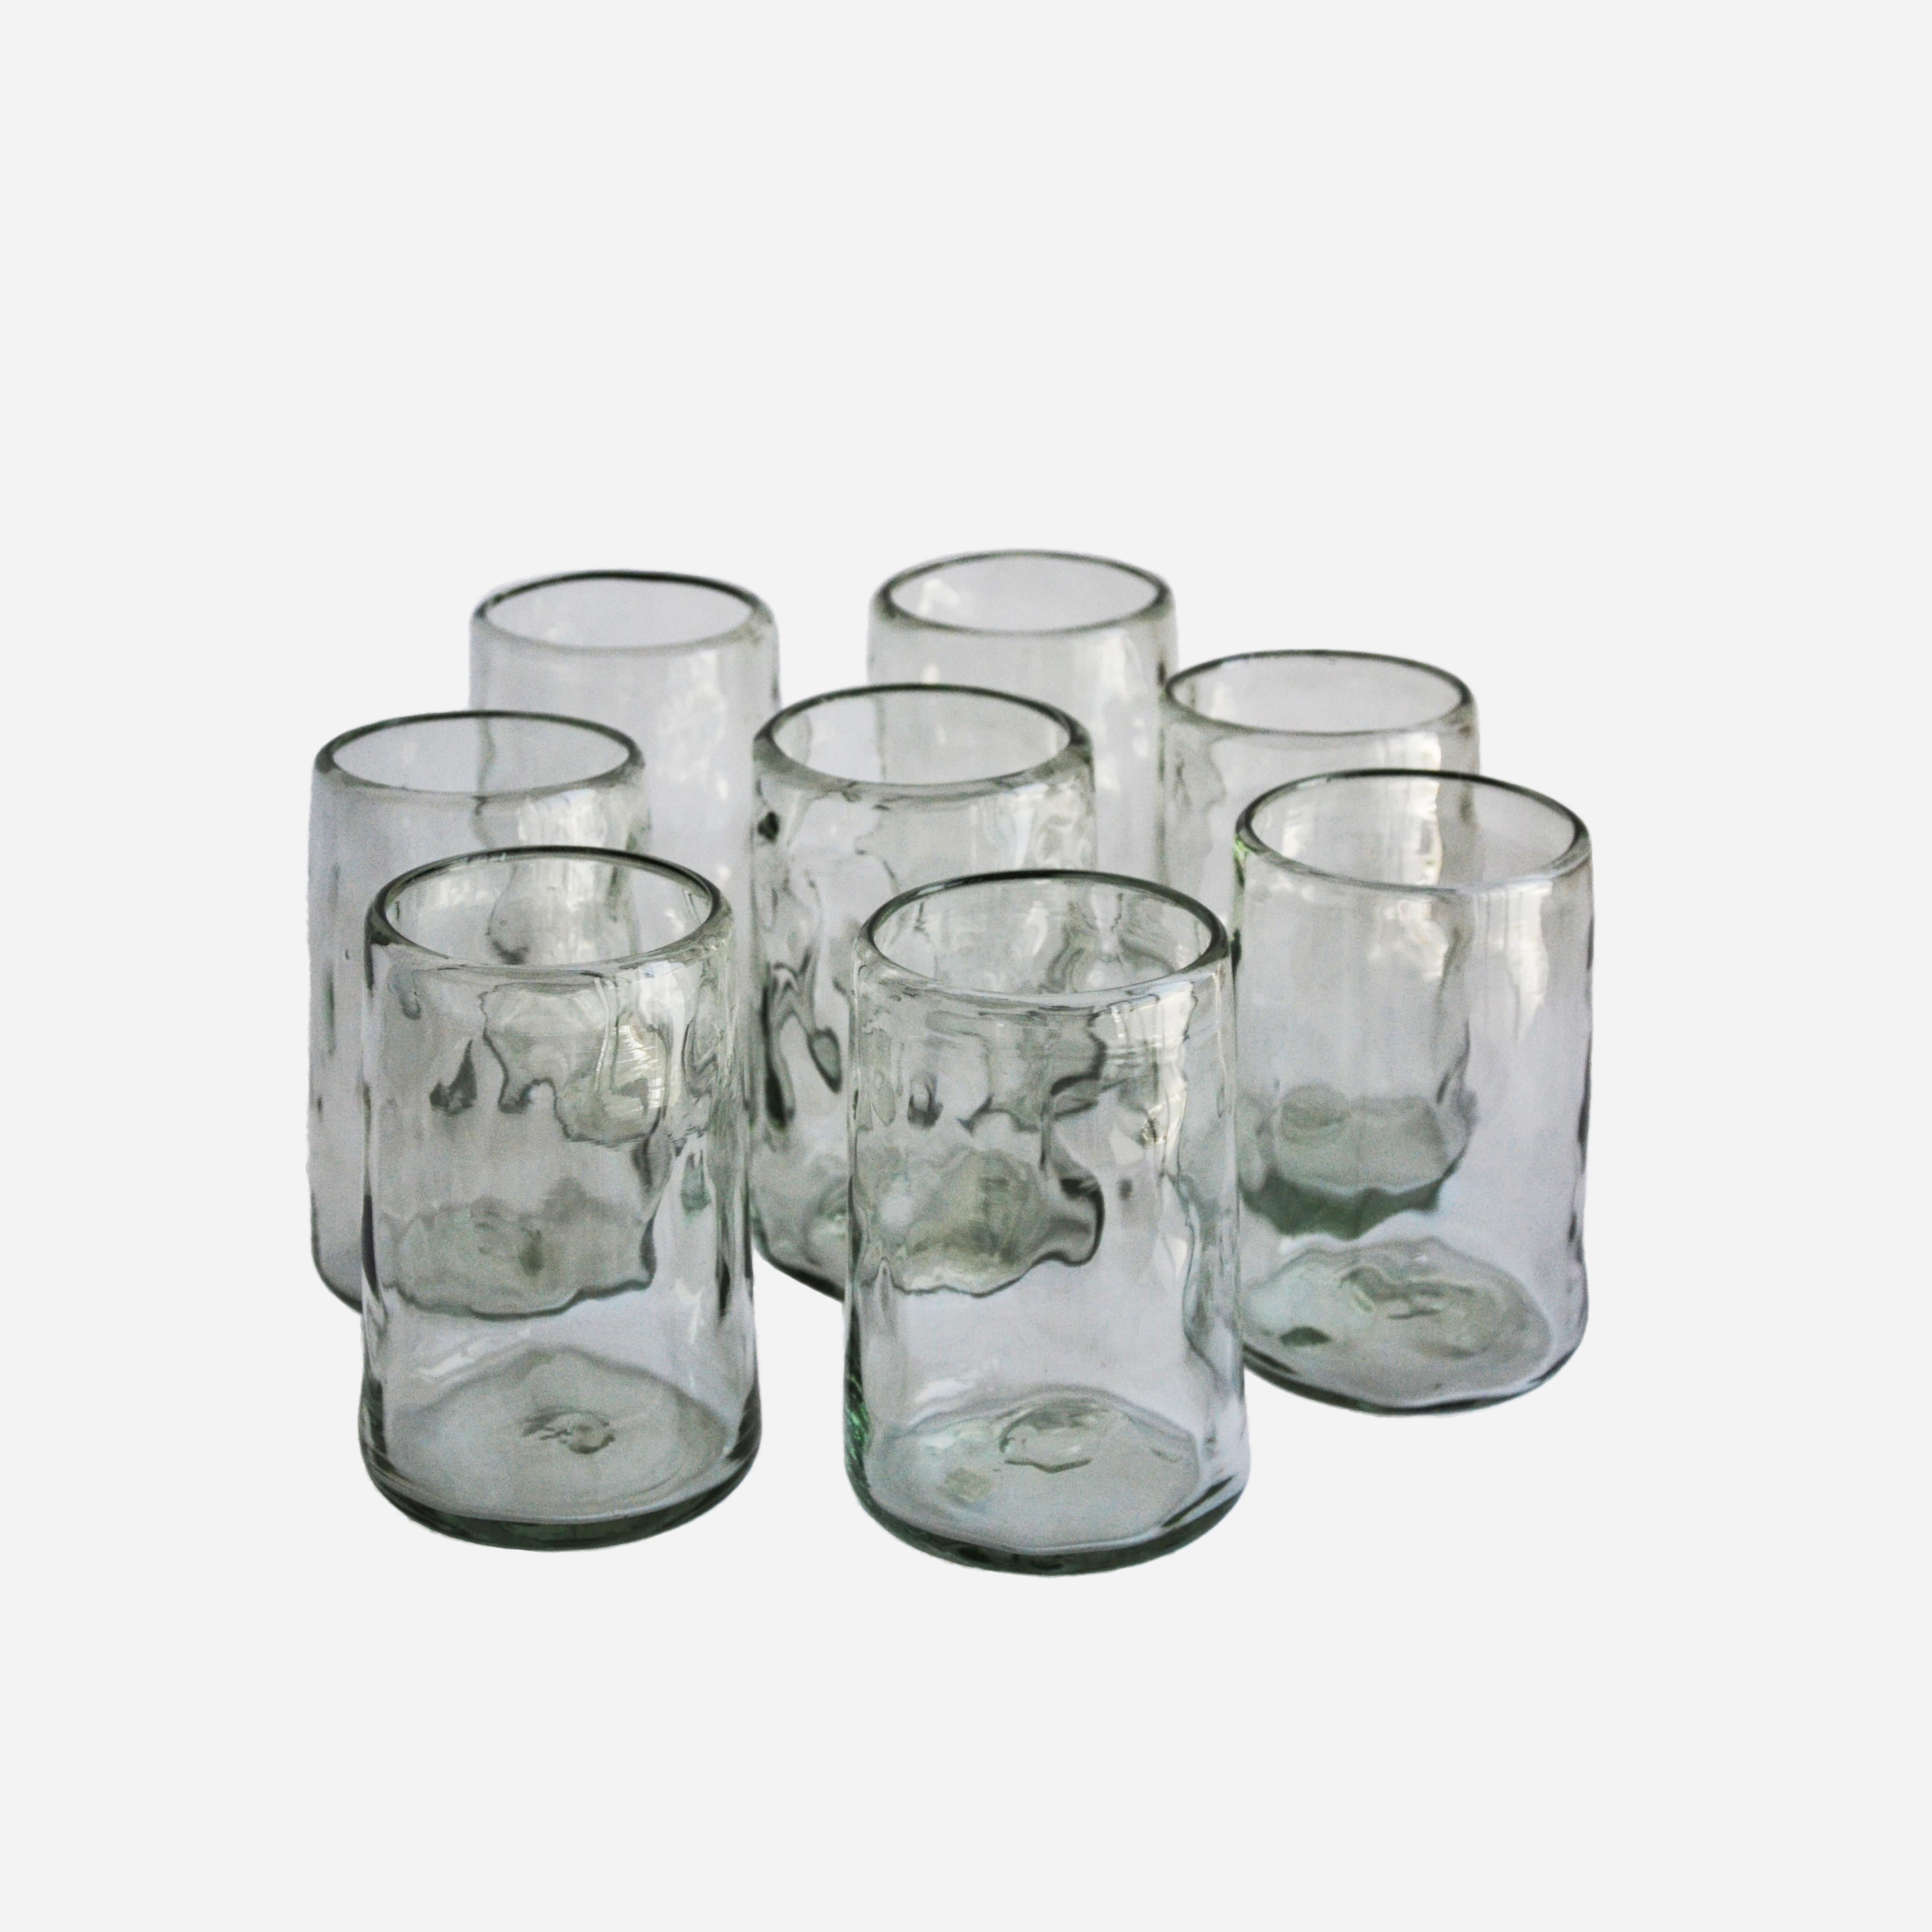 White lights is a set of handblown transparent glasses with an organic shape inspired by the natural surface of the land.

Nightlights of Mexico City collection of classic glasses inspired by the nightlife of Mexico’s cultural golden age in the